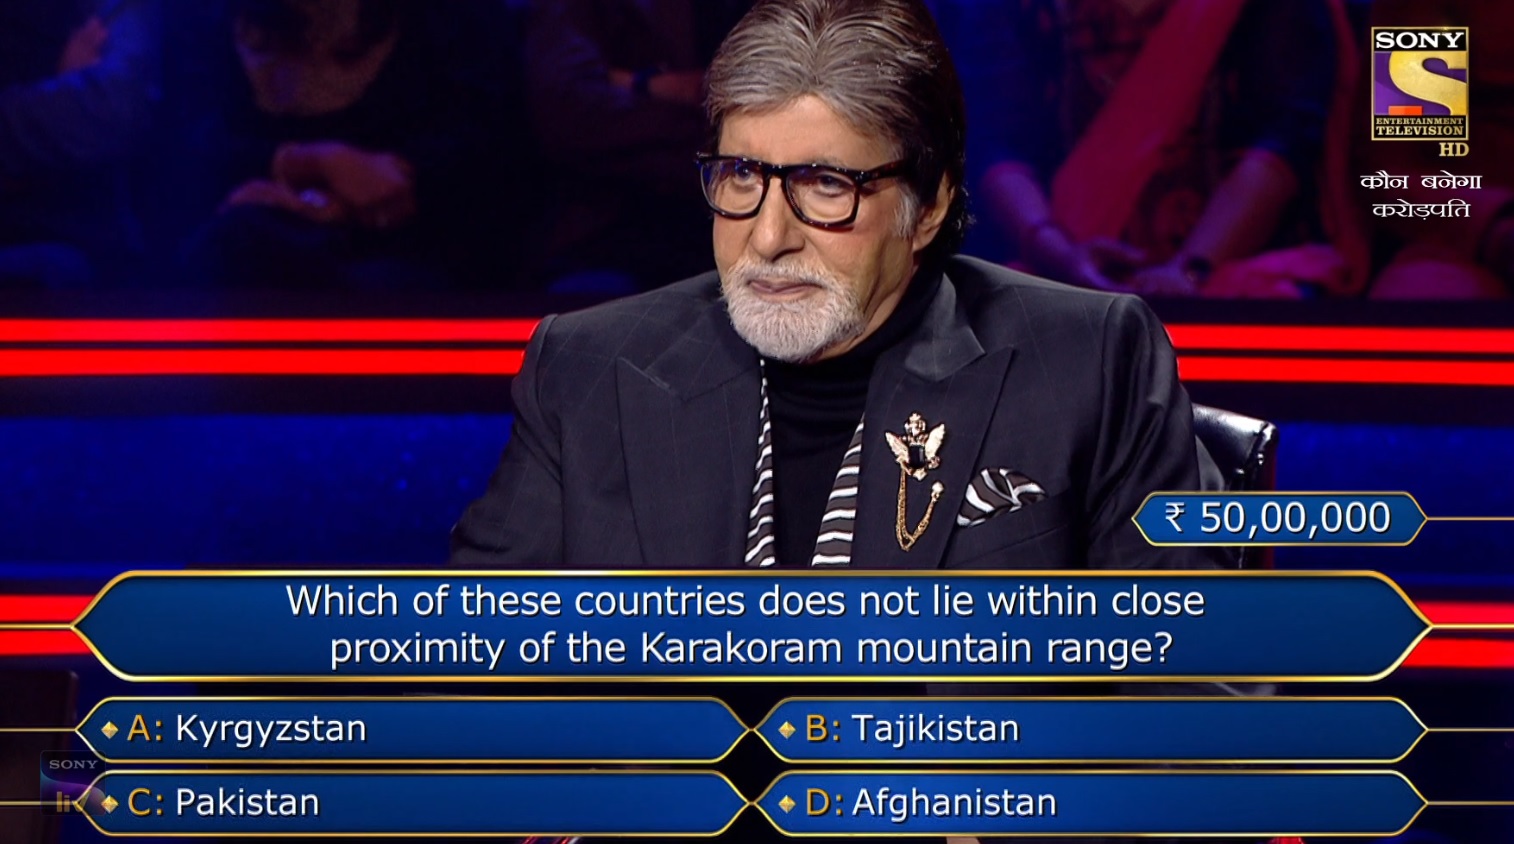 Ques : Which of these countries does not lie within close proximity of the Karakoram mountain range?